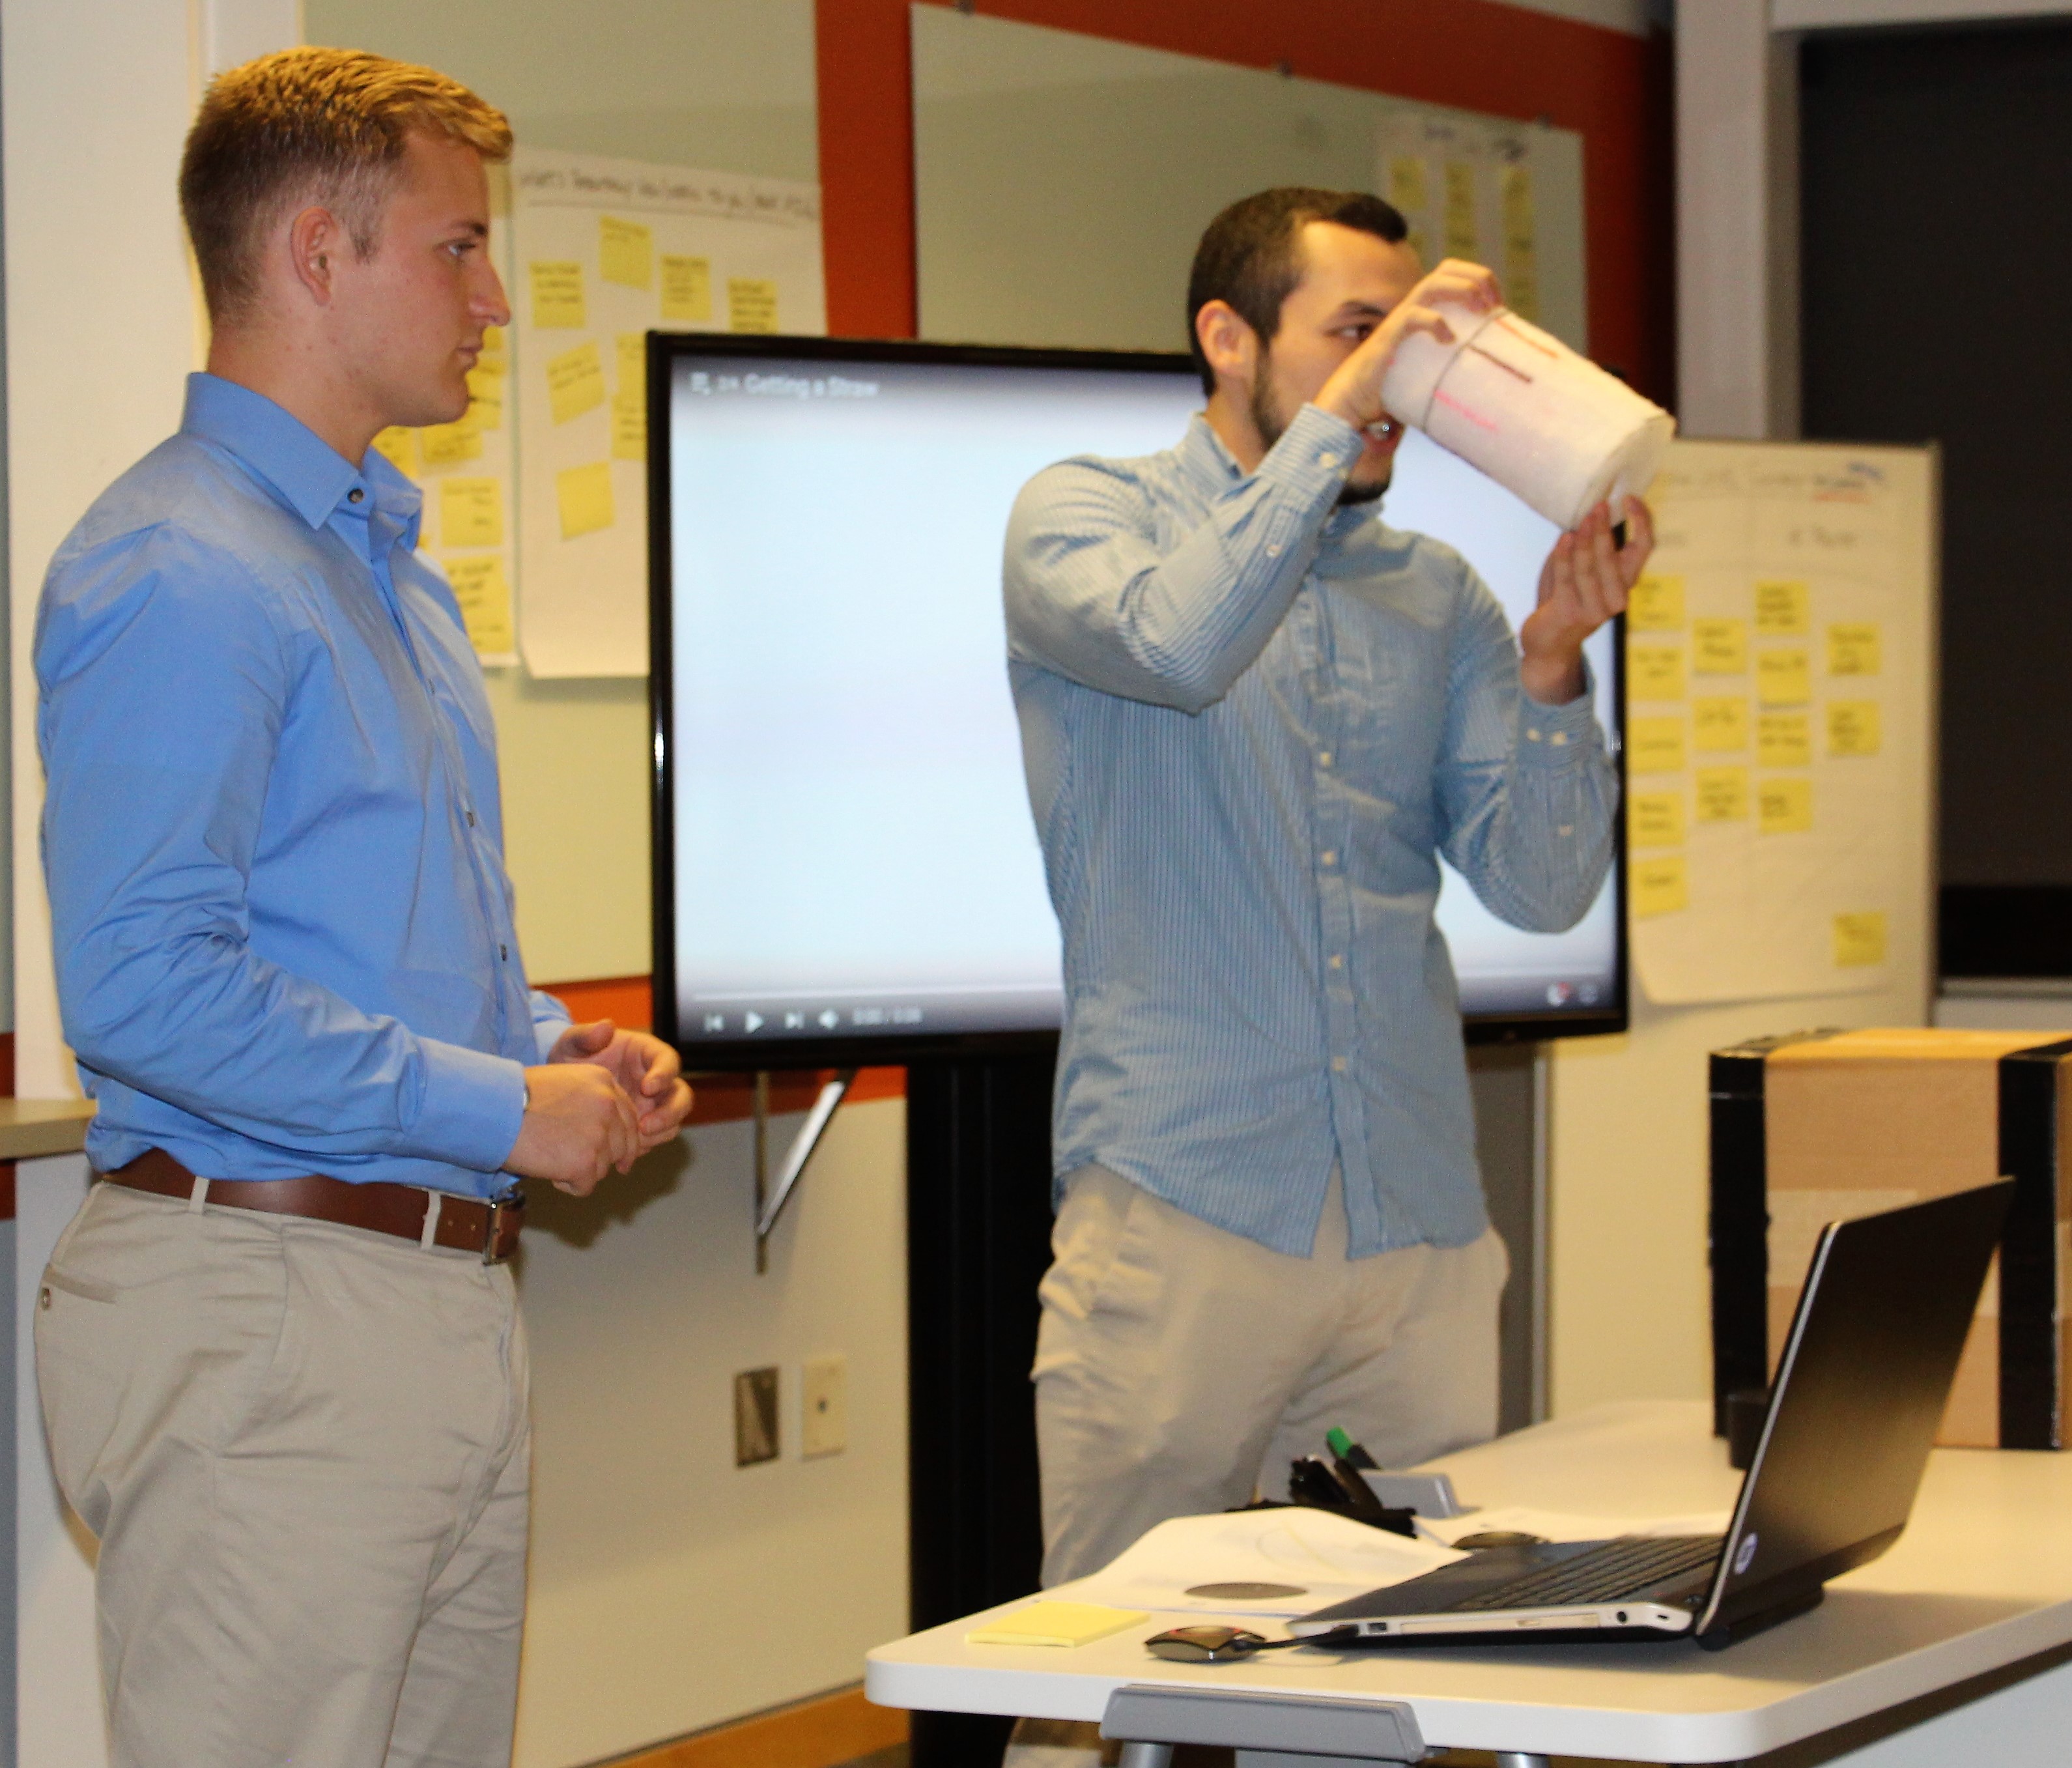 An ENGR 2367 class design team shows their prototype for the design challenge.